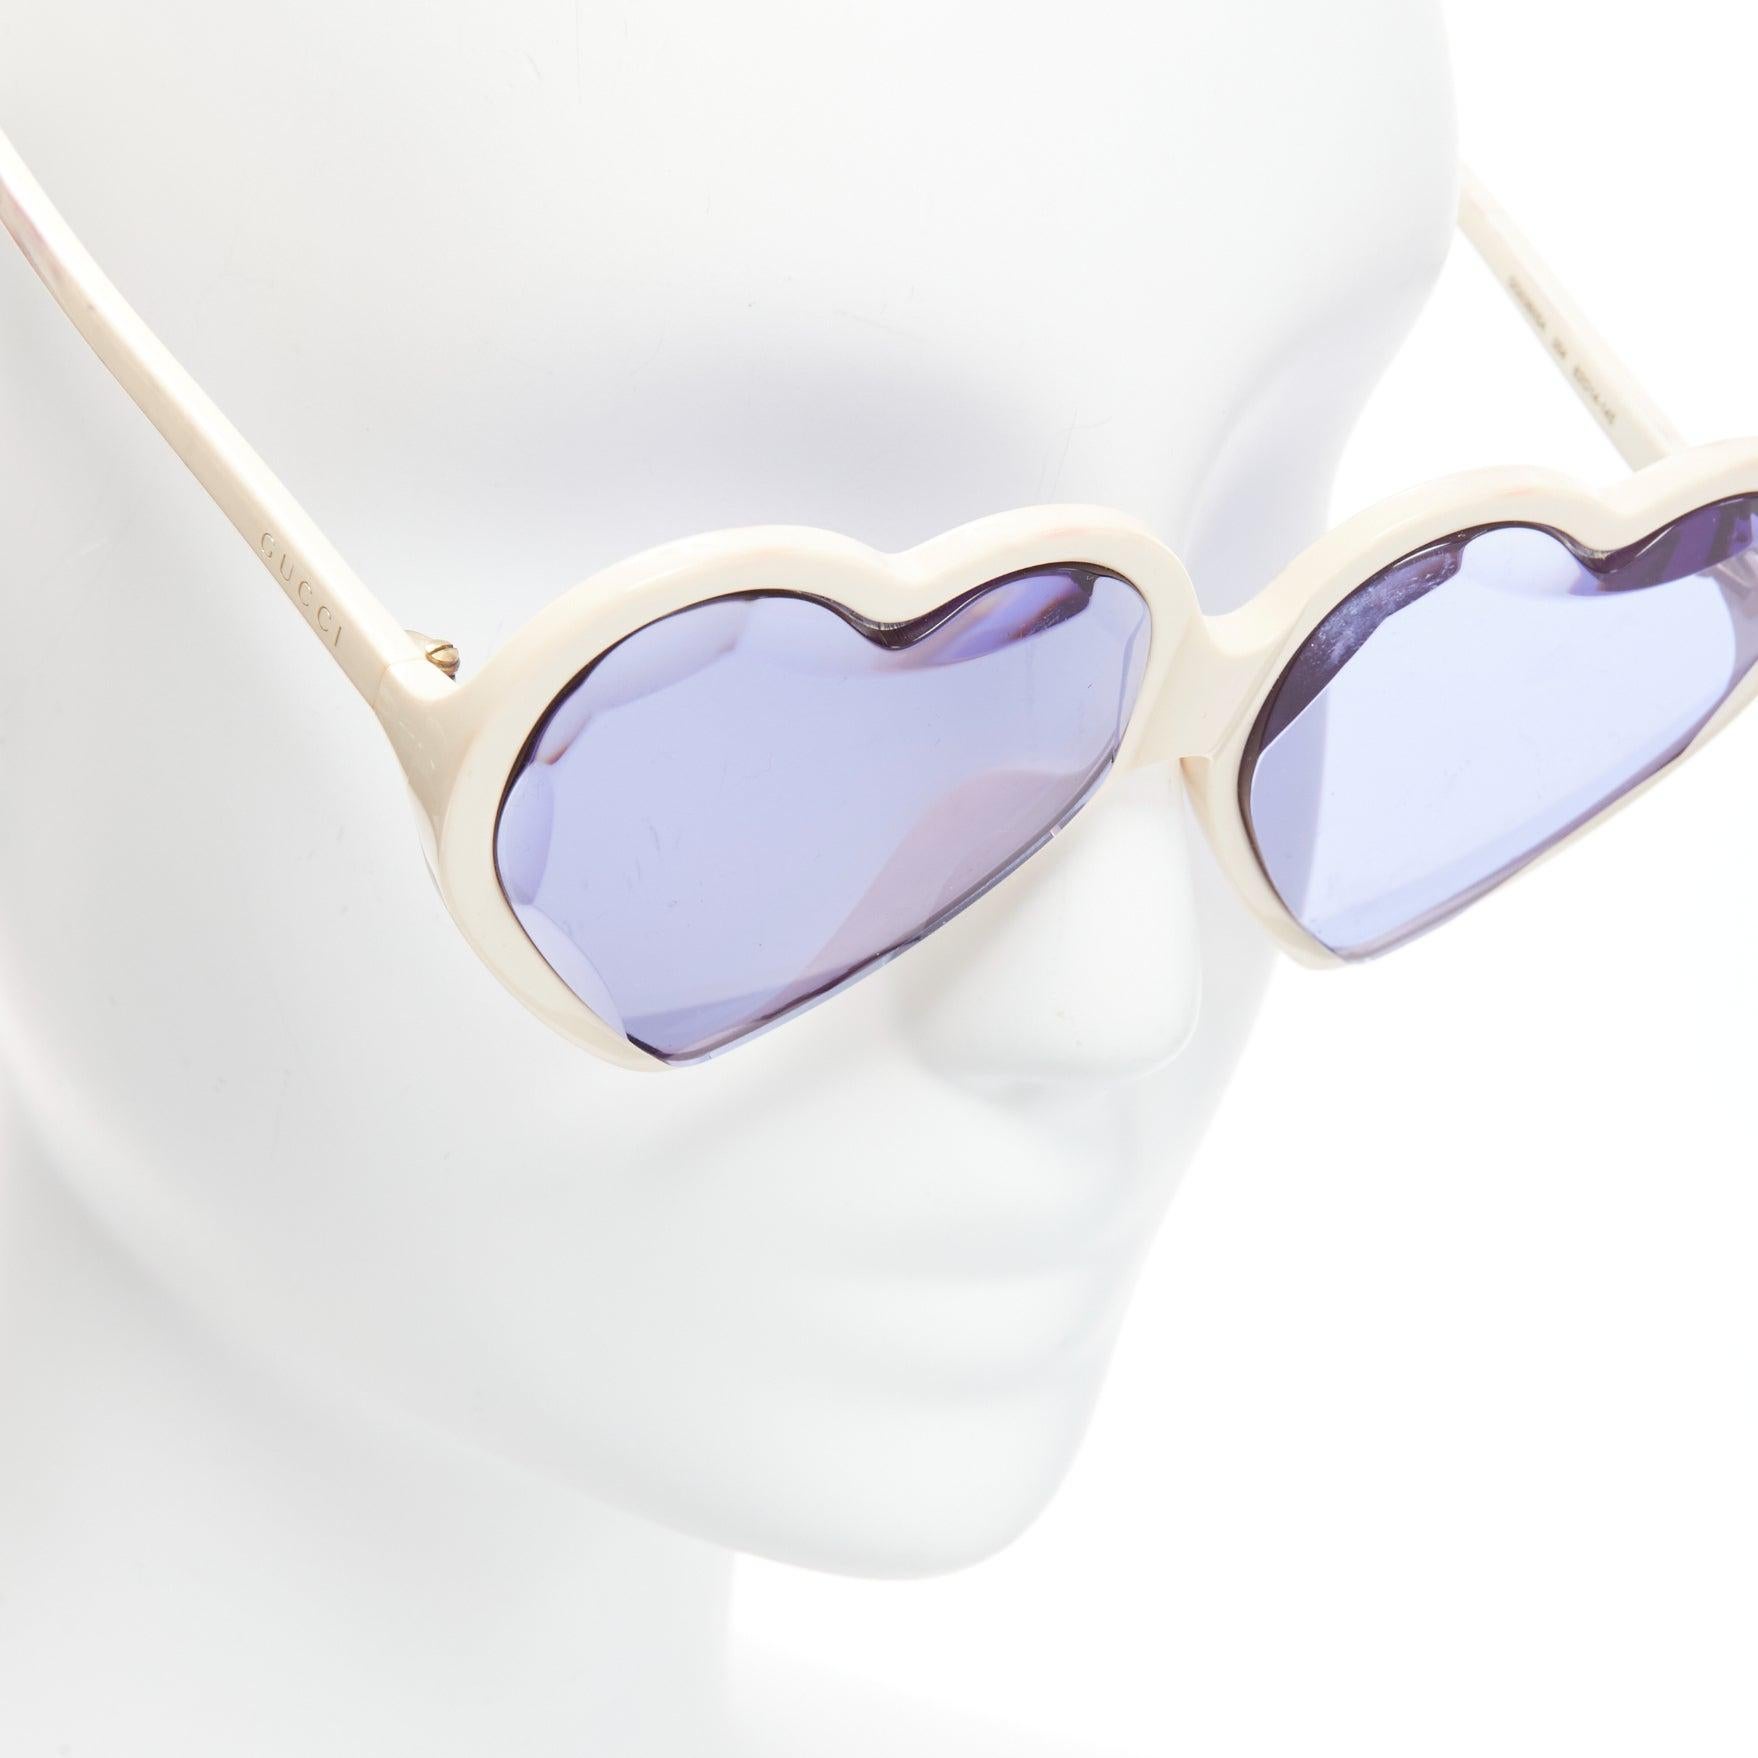 GUCCI GG0360SA Hollywood Forever Runway purple white heart sunglasses
Reference: TGAS/D00626
Brand: Gucci
Designer: Alessandro Michele
Model: GG0360SA
Collection: Hollywood Forever - Runway
Material: Acetate
Color: White
Pattern: Solid
Lining: White